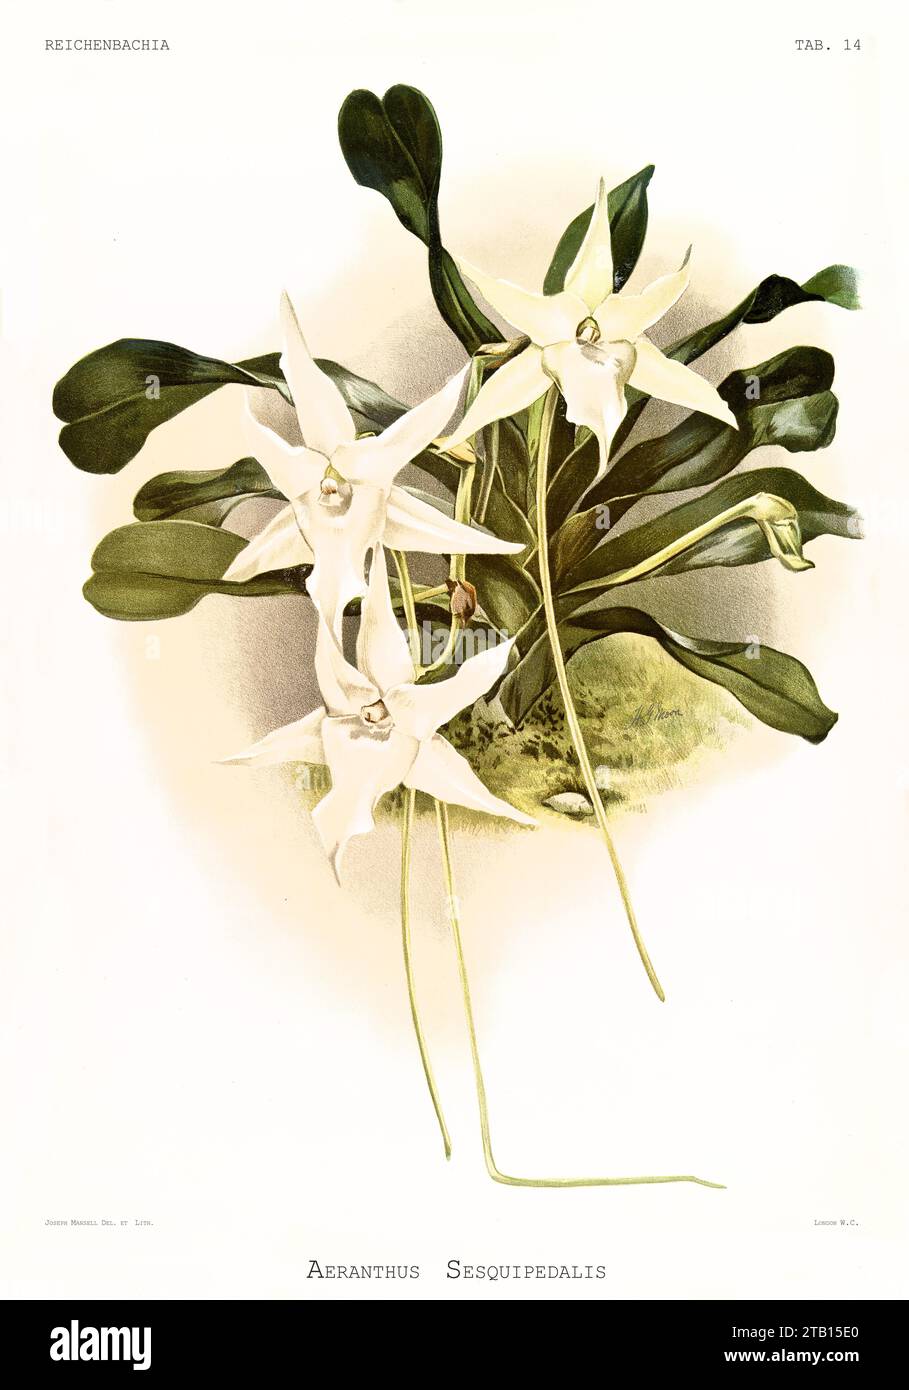 Old illustration of  Darwin's Orchid (Angraecum sesquipedale). Reichenbachia, by F. Sander. St. Albans, UK, 1888 - 1894 Stock Photo